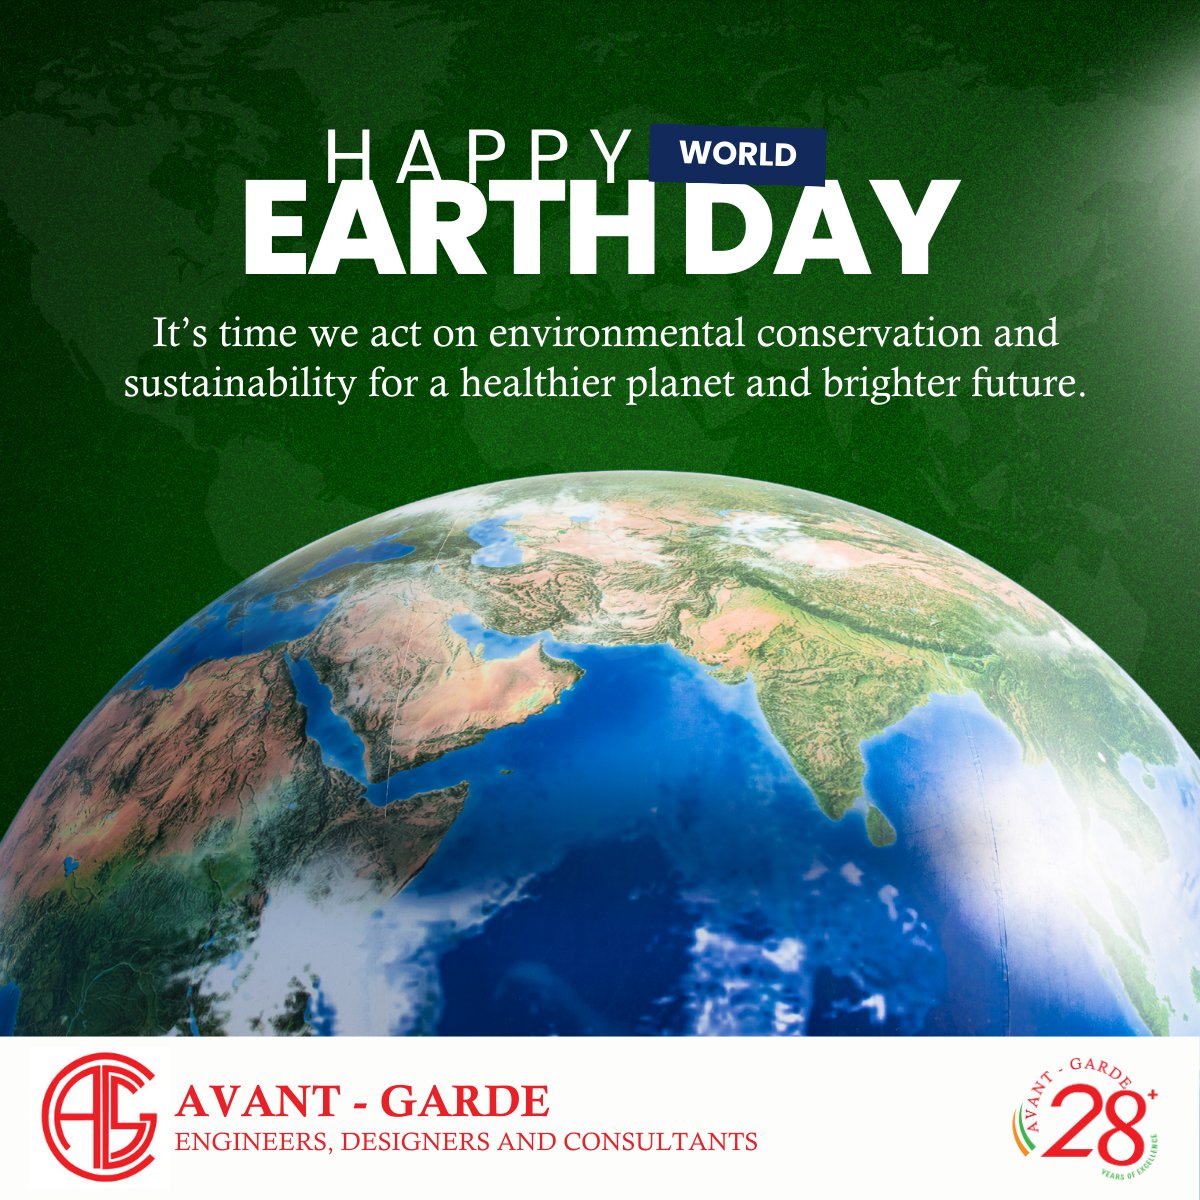 Happy Earth Day 2024 from Avant-Garde Engineers, Designers and Consultants. Time to act on our planet’s conservation through sustainability initiatives
#sustainability #earthday #earth #earthday2024 #avantgarde #avantgardeindia #planet #conservation #saynotoplastics #notoplastics